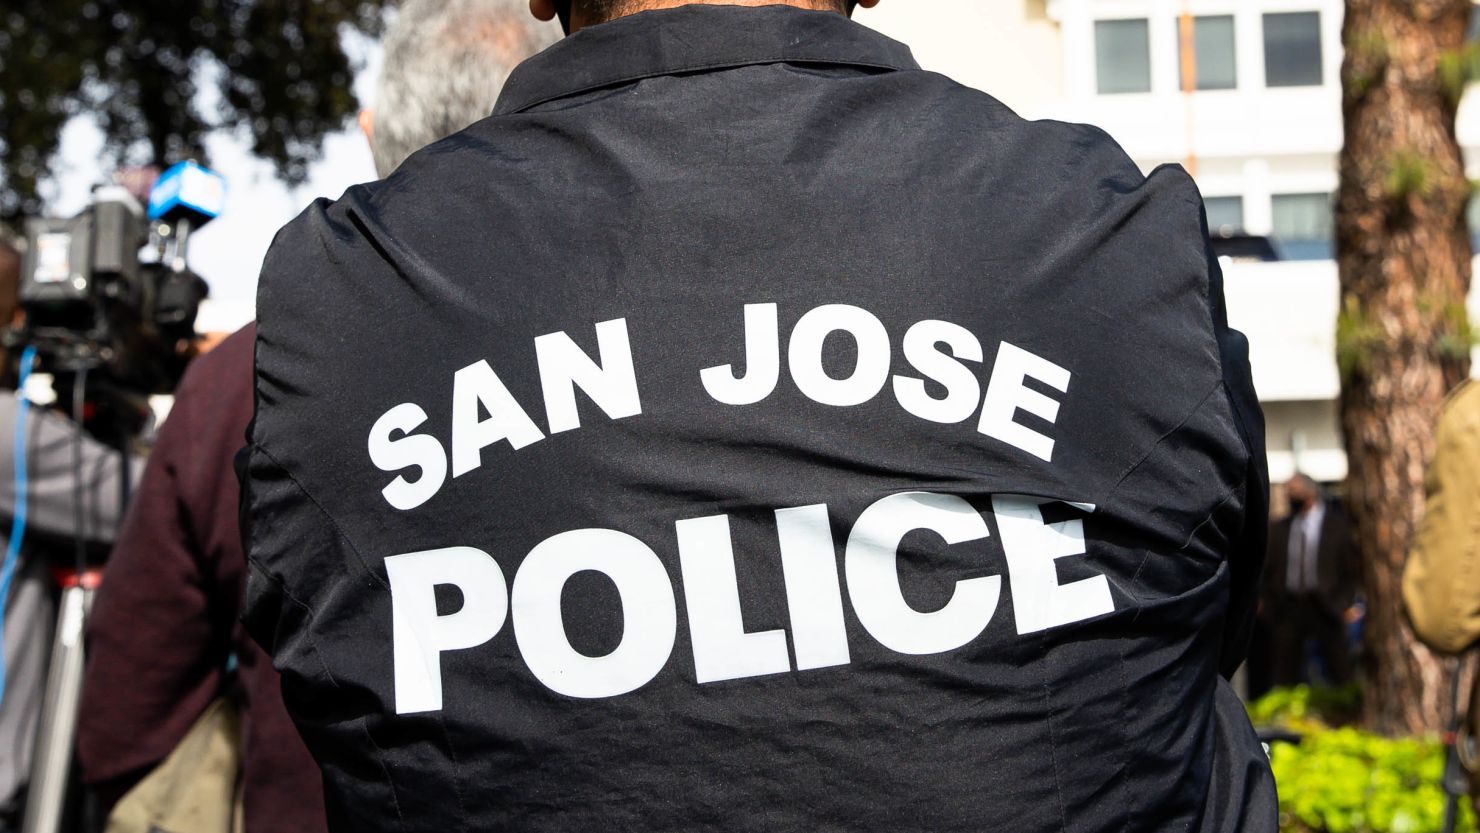 SAN JOSE - MARCH 17: A person wears a San Jose Police jacket during a press conference outside of the San Jose Police department in San Jose, Calif., on Wednesday, March, 17, 2021. (Photo by Randy Vazquez/MediaNews Group/The Mercury News via Getty Images)